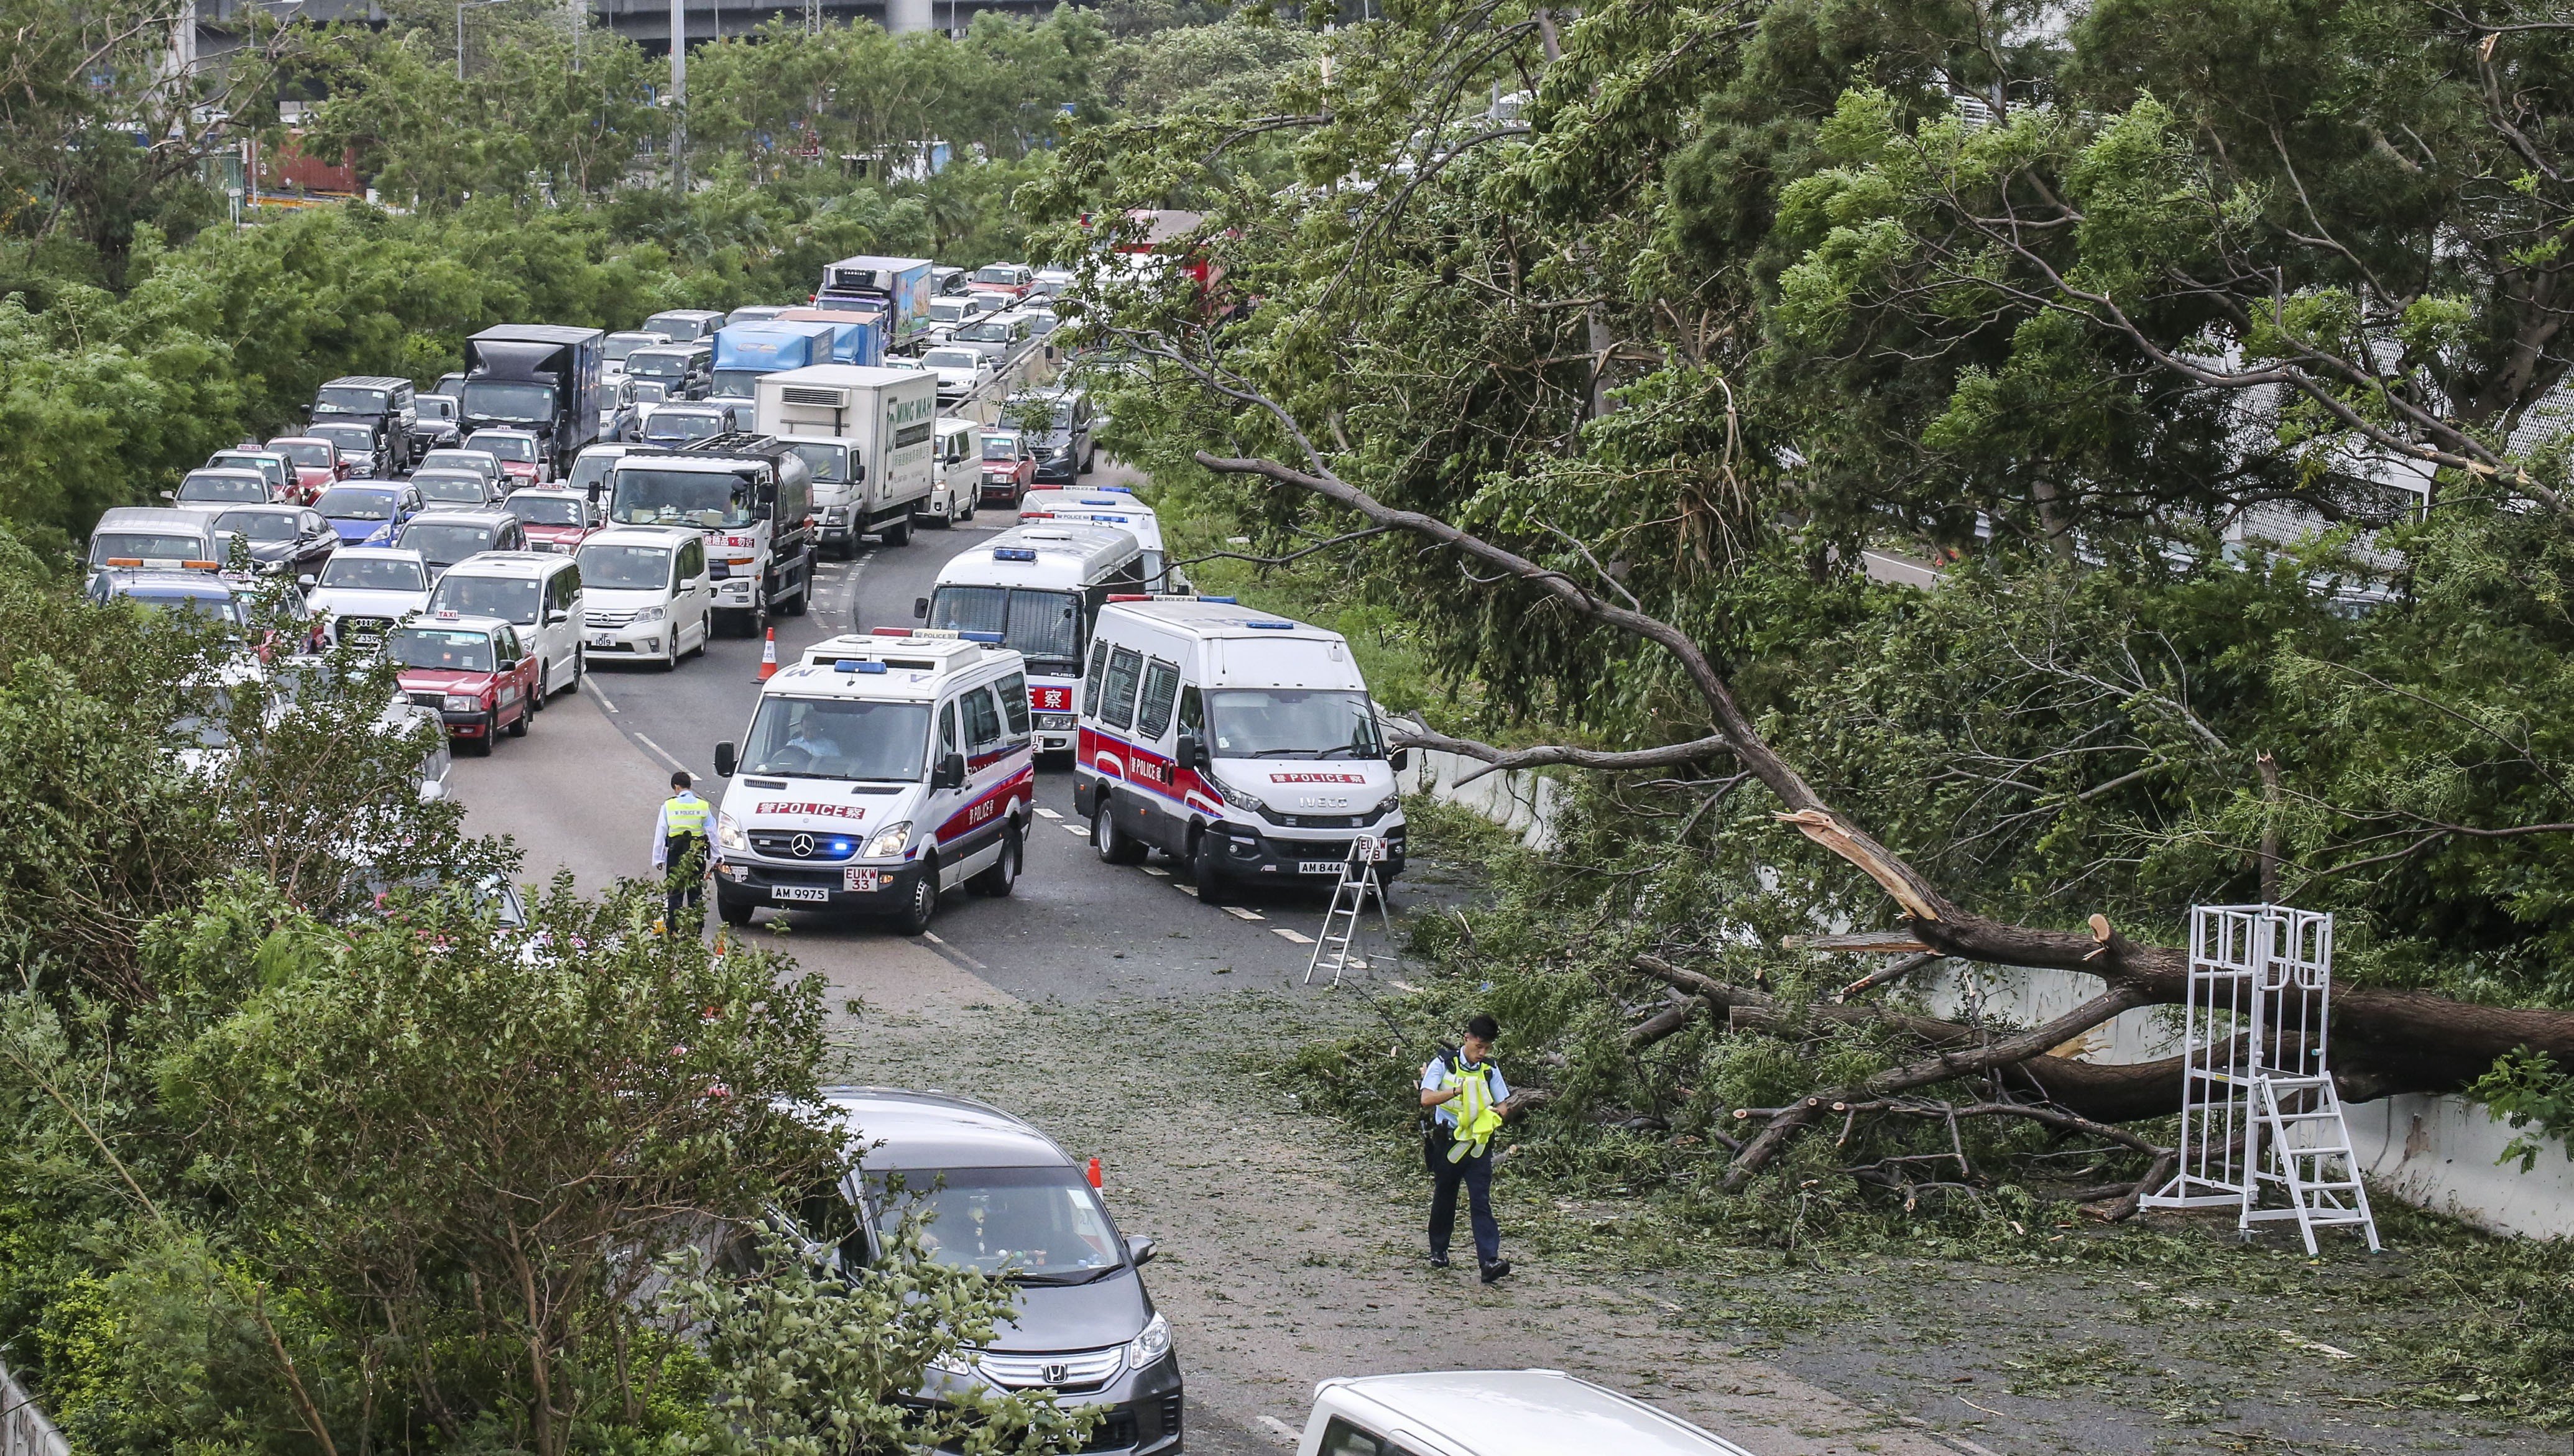 Fallen trees on Kwai Chung Road after Typhoon Mangkhut in September. Photo: Felix Wong